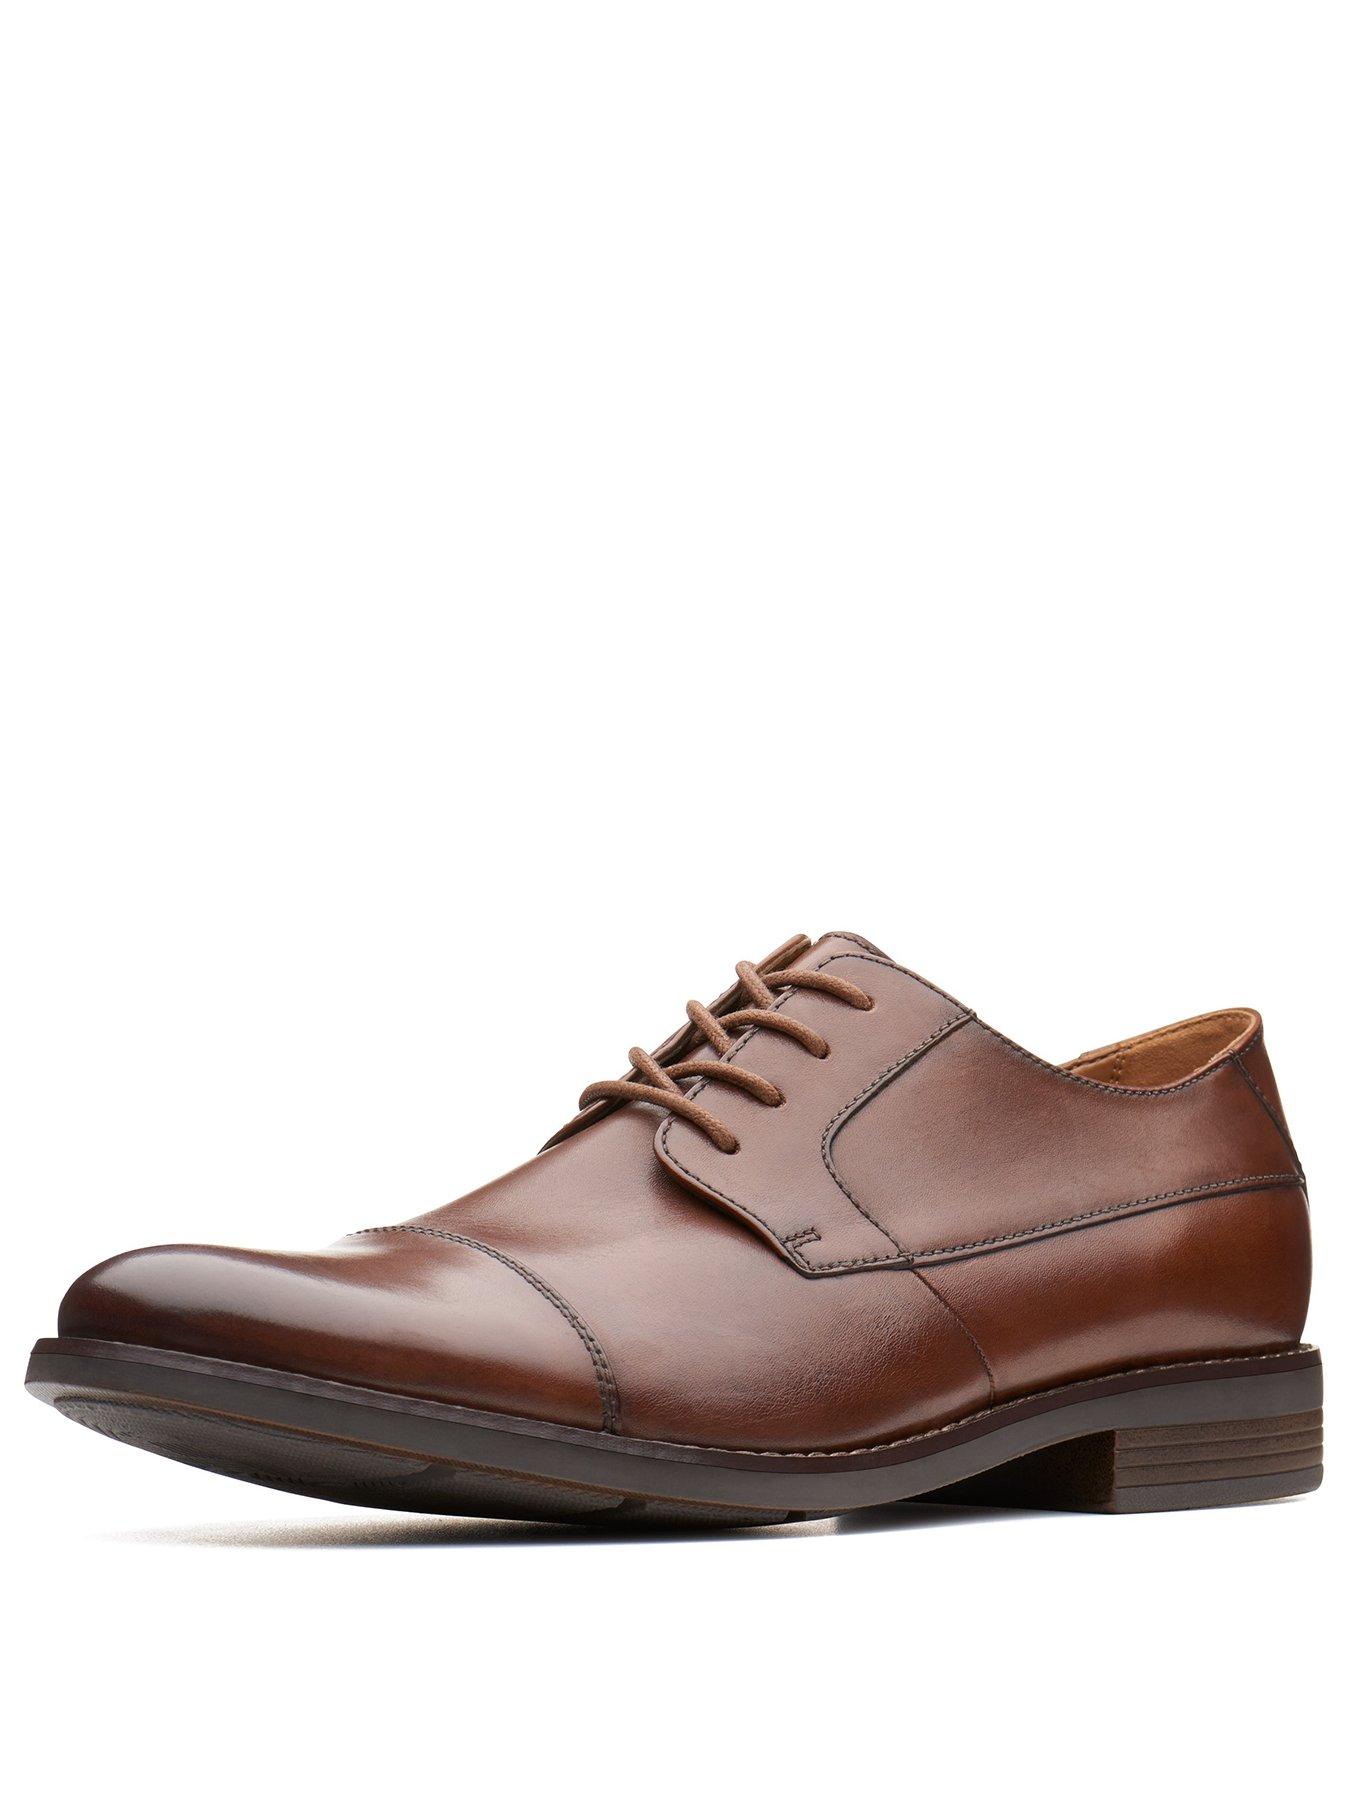 clarks shoes discount code 219